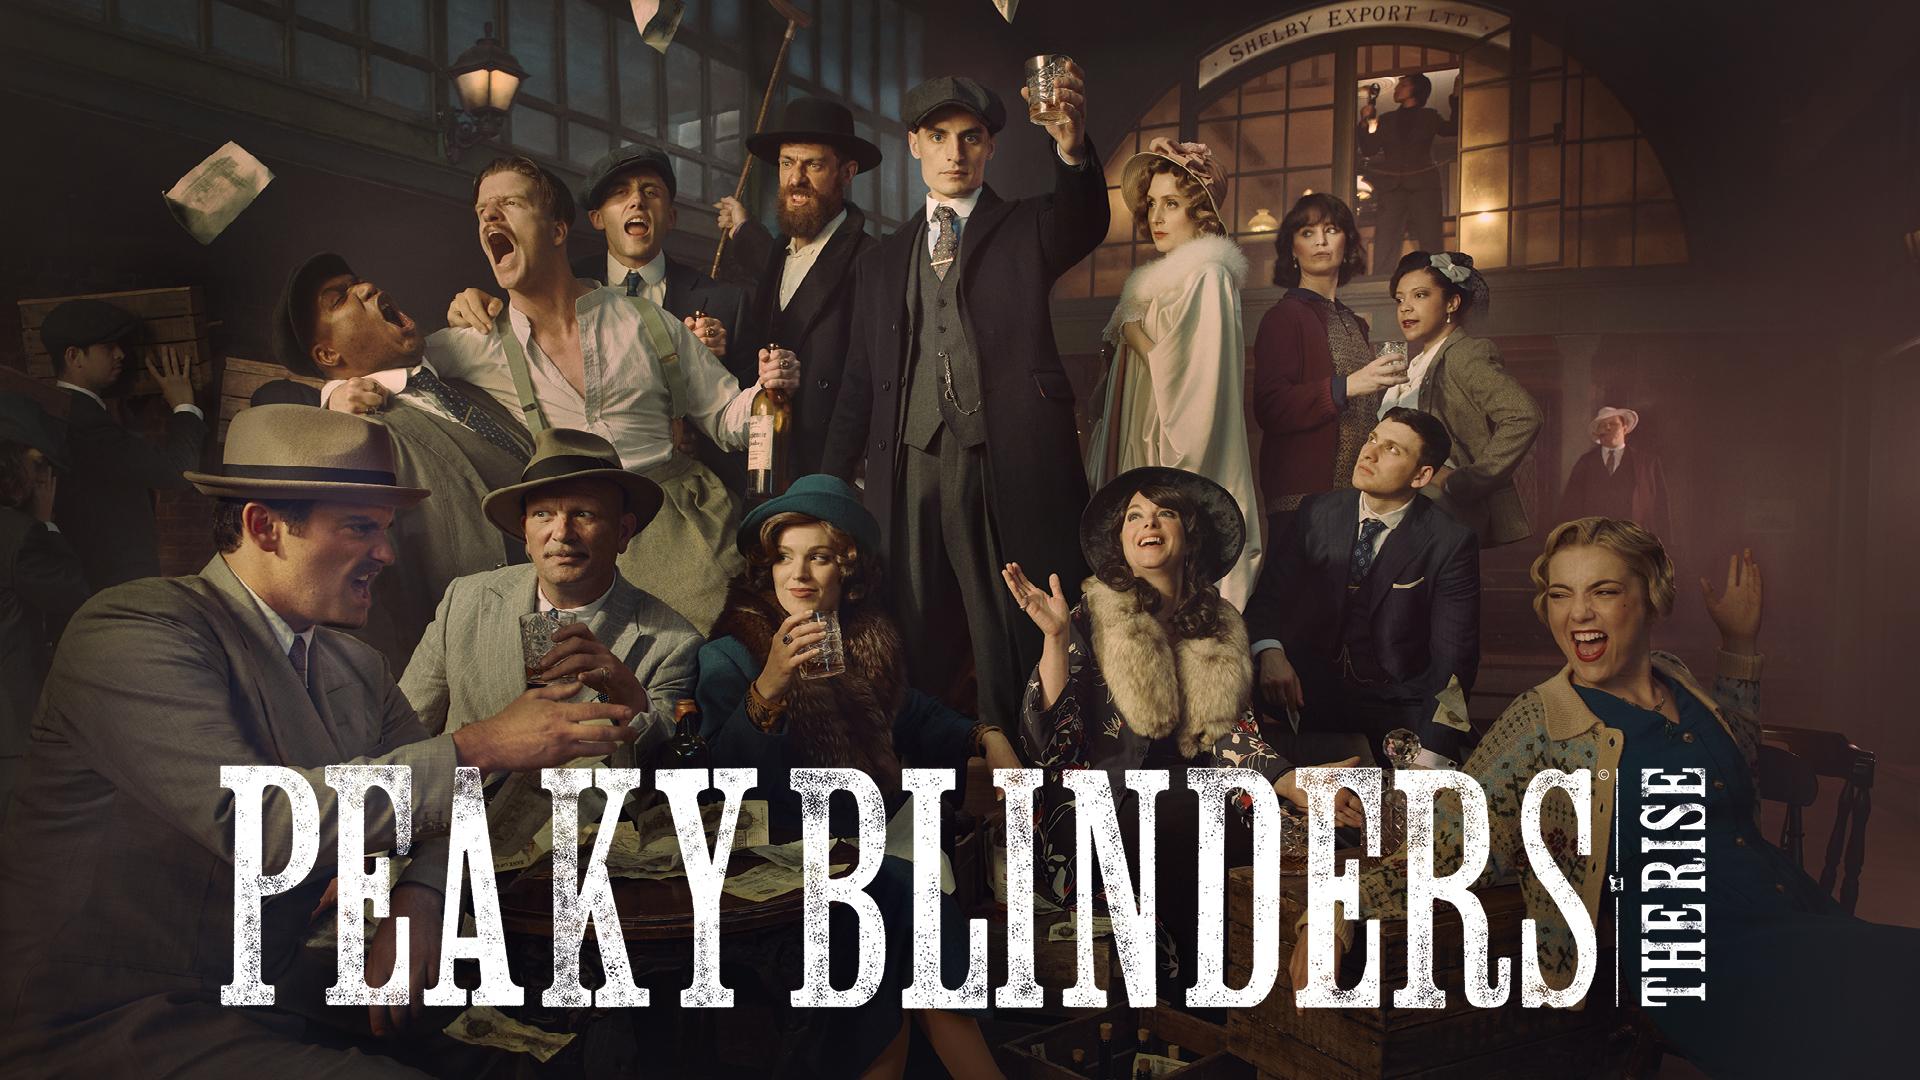 Peaky Blinders: The Rise, The Eden Club photo #3